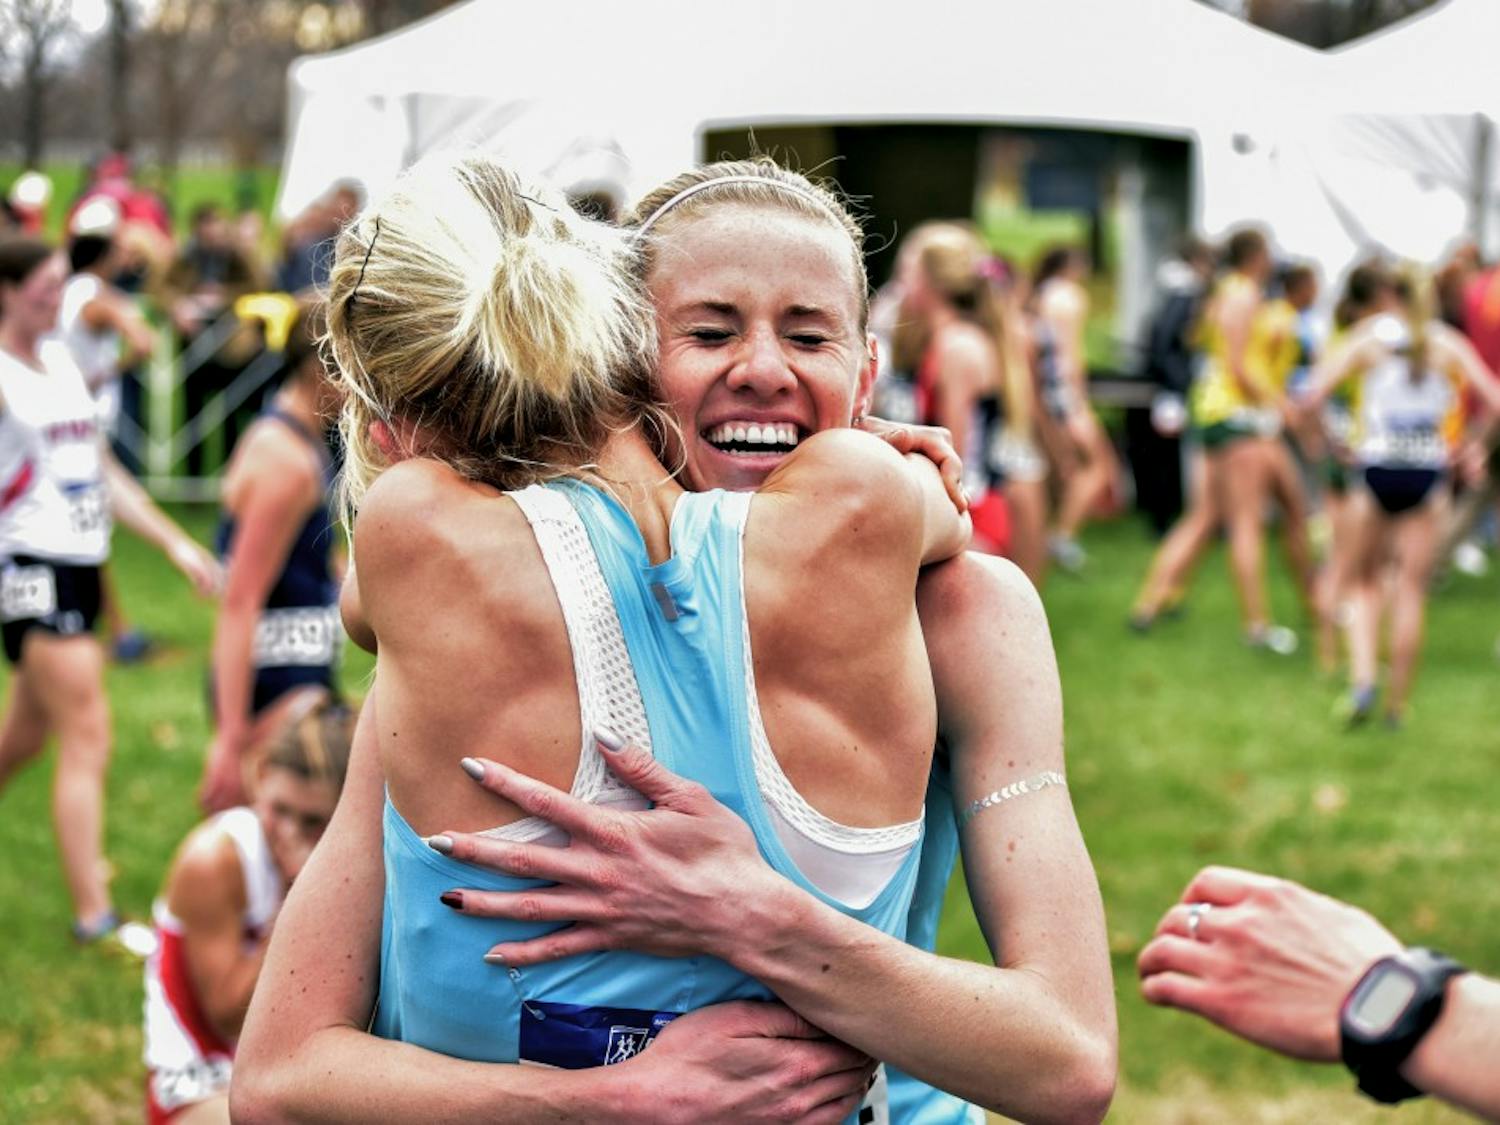 Senior Courtney Frerichs is embraced by one of her teammates after crossing the finish line at the NCAA Division I Cross Country Championships on Saturday, Nov. 21 in Louisville, KY. Frerichs was the first Lobo to cross the finish line, coming in 4th place to help UNM win its second ever national title.